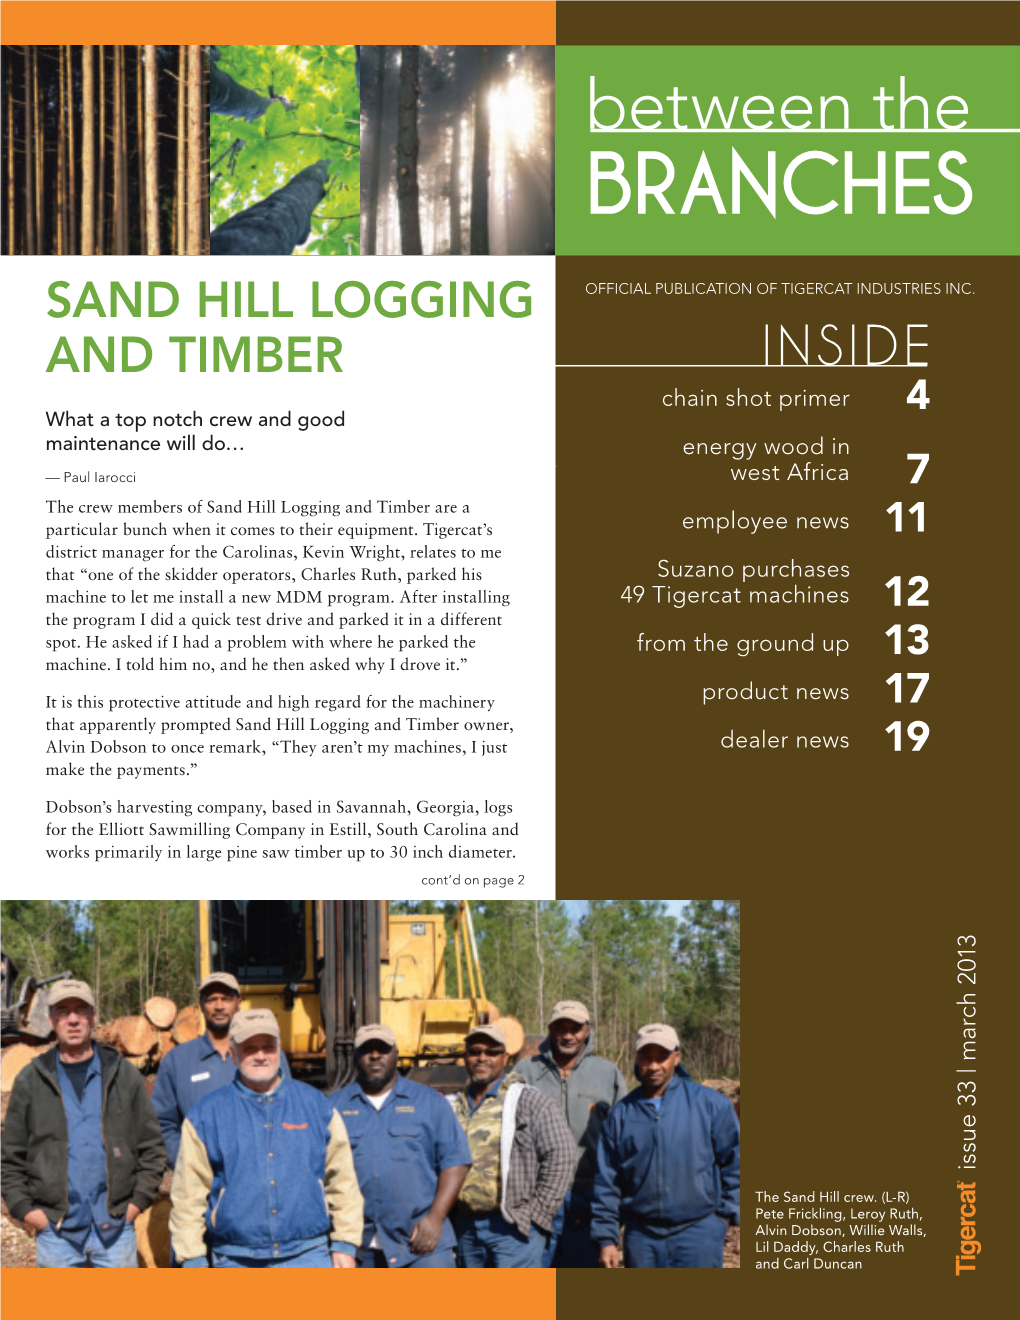 Branches Sand Hill Logging Official Publication of Tigercat Industries Inc